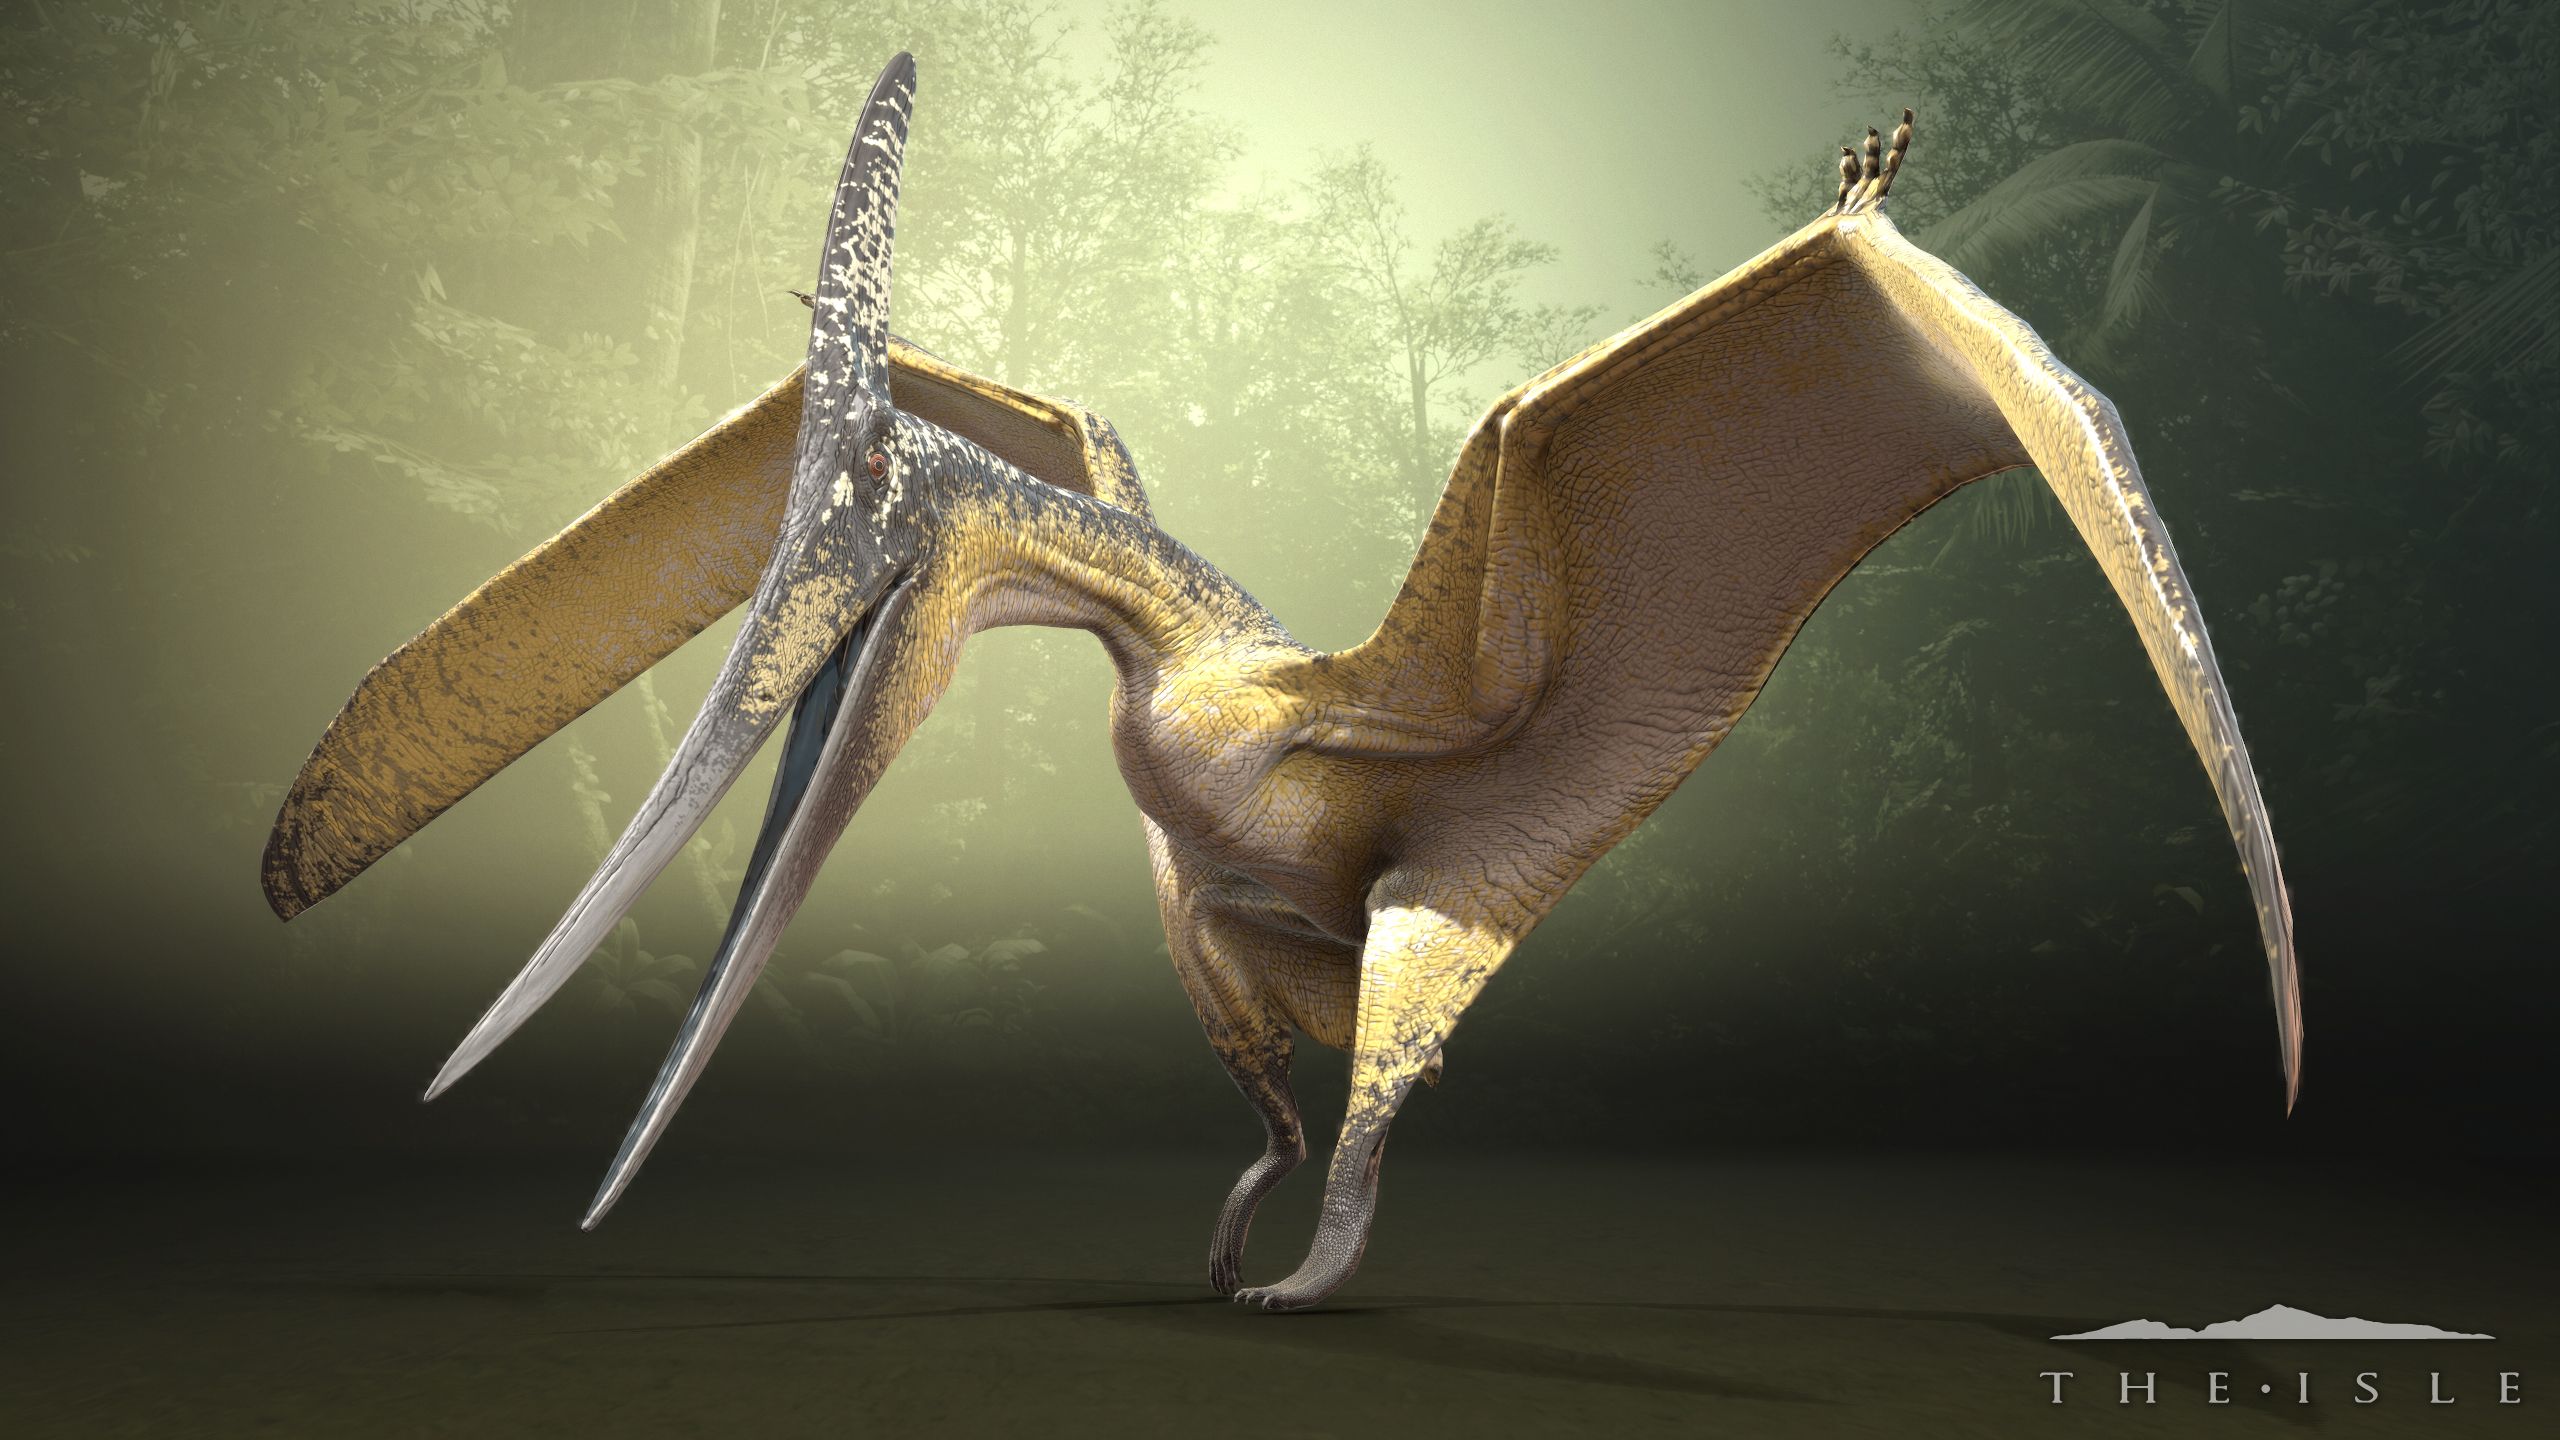 Pteranodon vs Pterodactyl, Some birds, some pterosaurs (which is